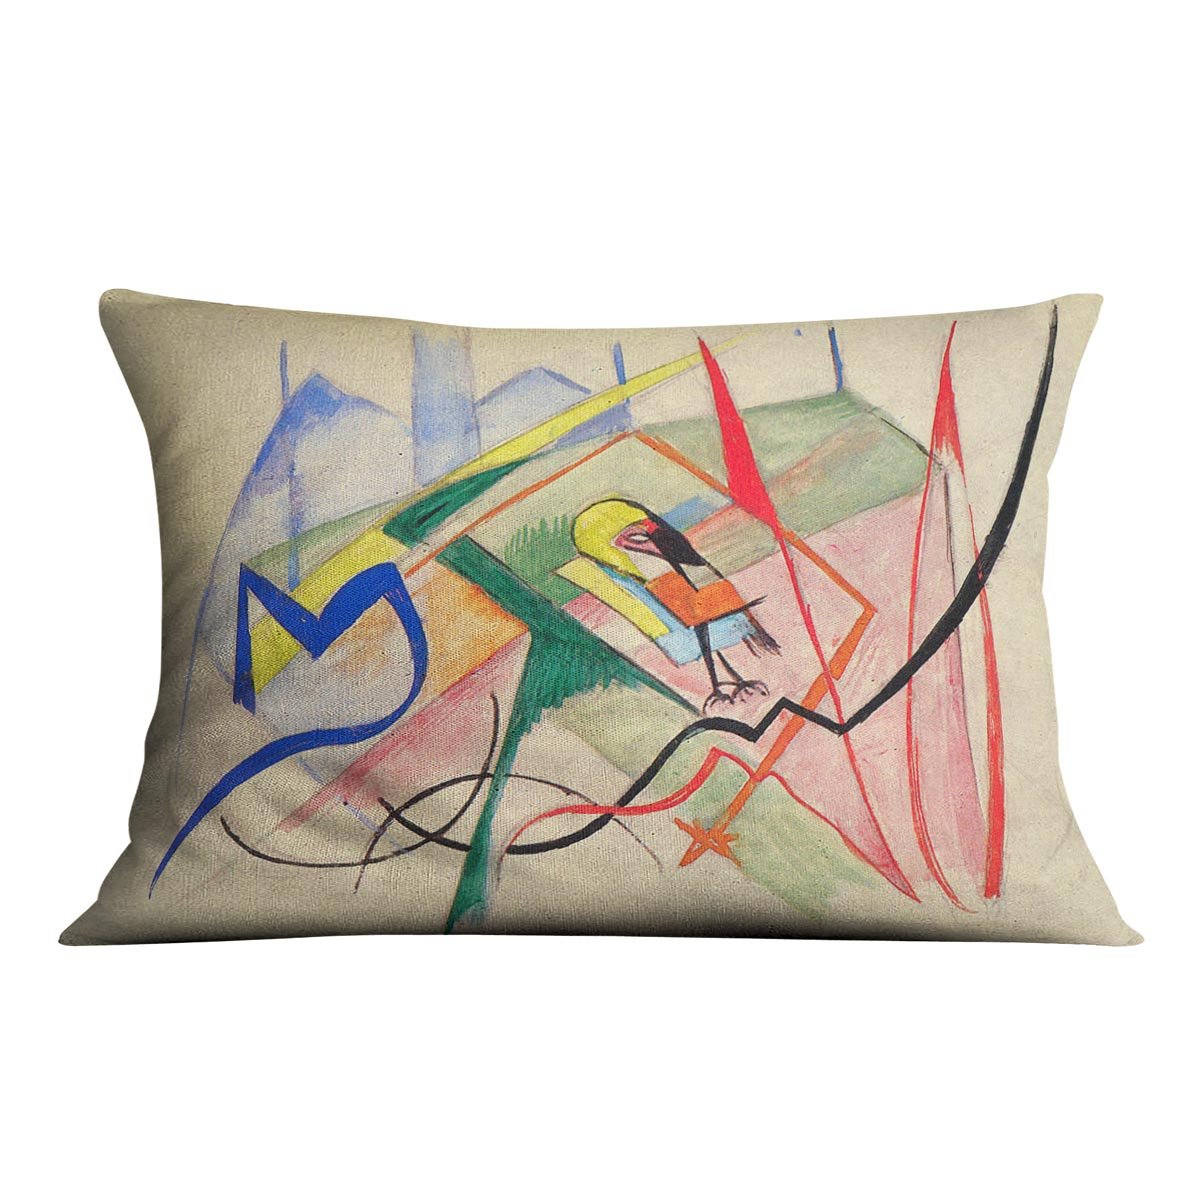 Small mythical creatures by Franz Marc Throw Pillow